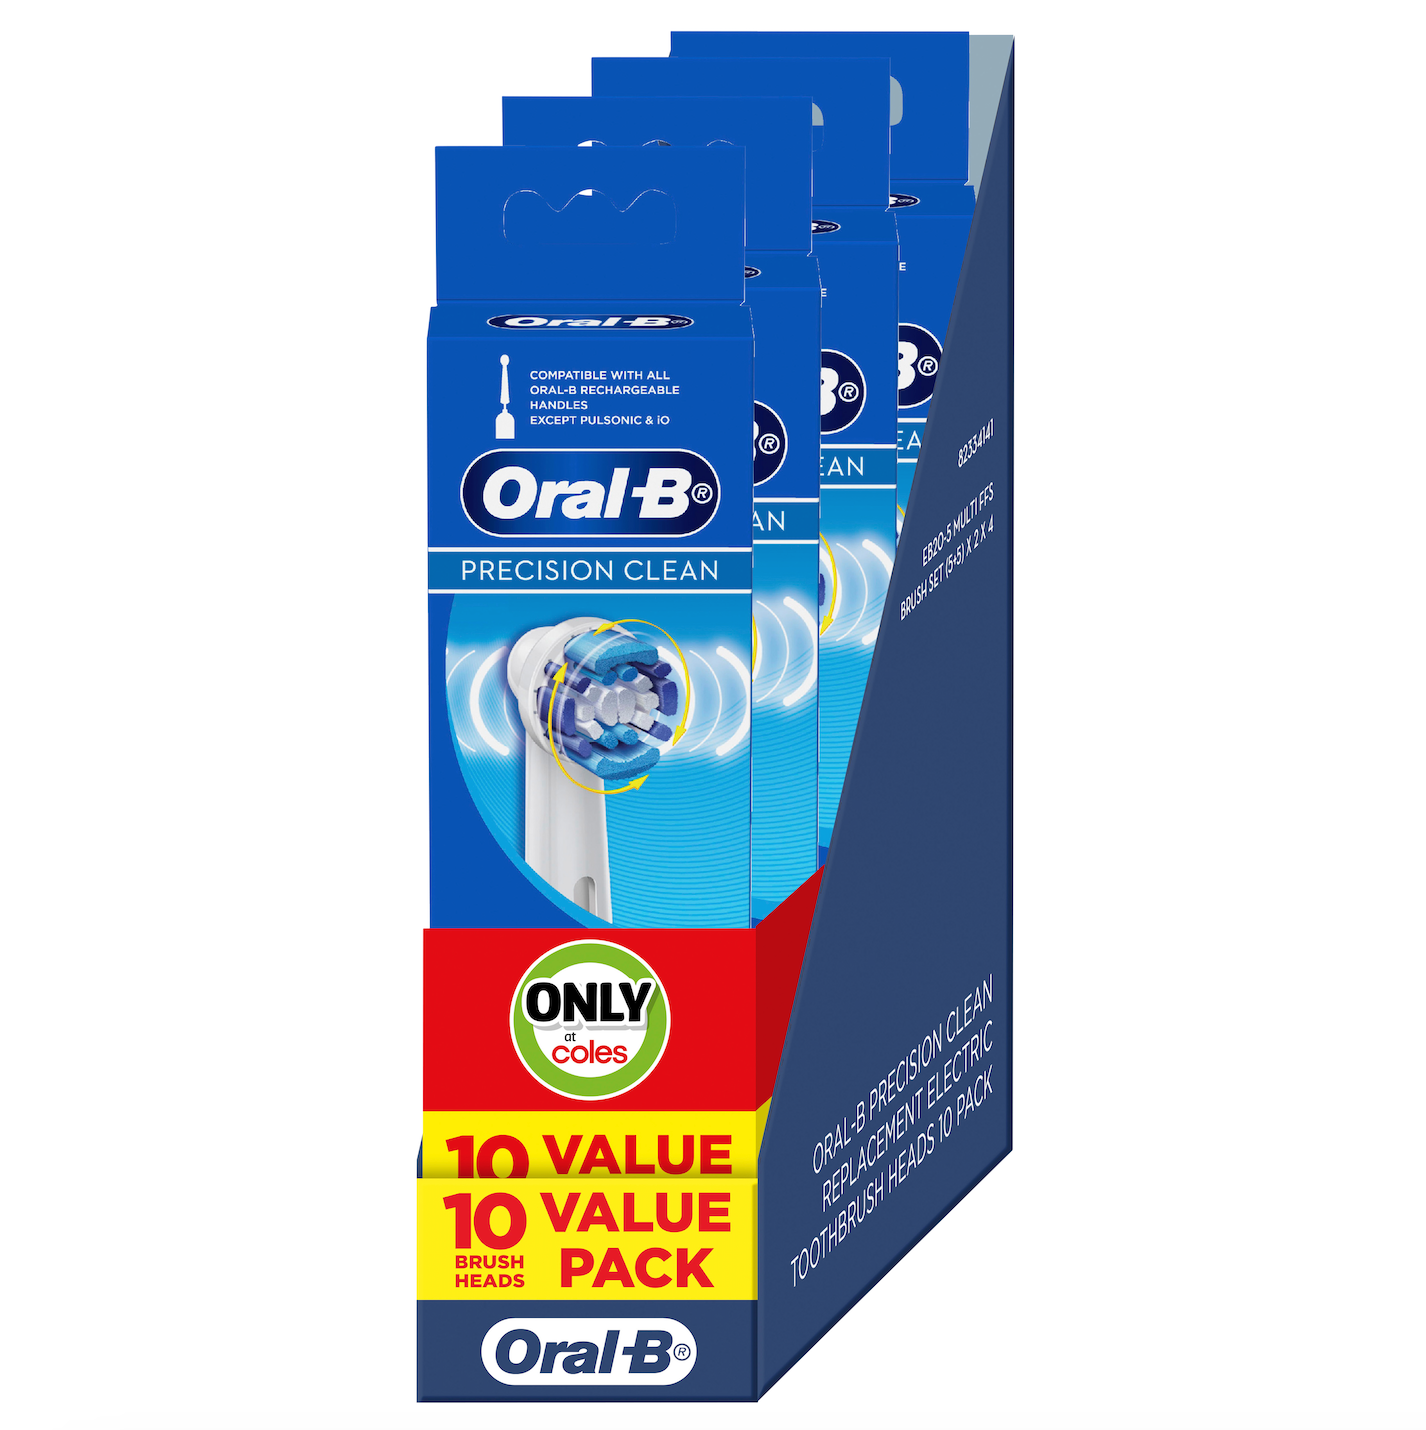 Oral-B Precision Clean Replacement Brush Heads (10pcs)